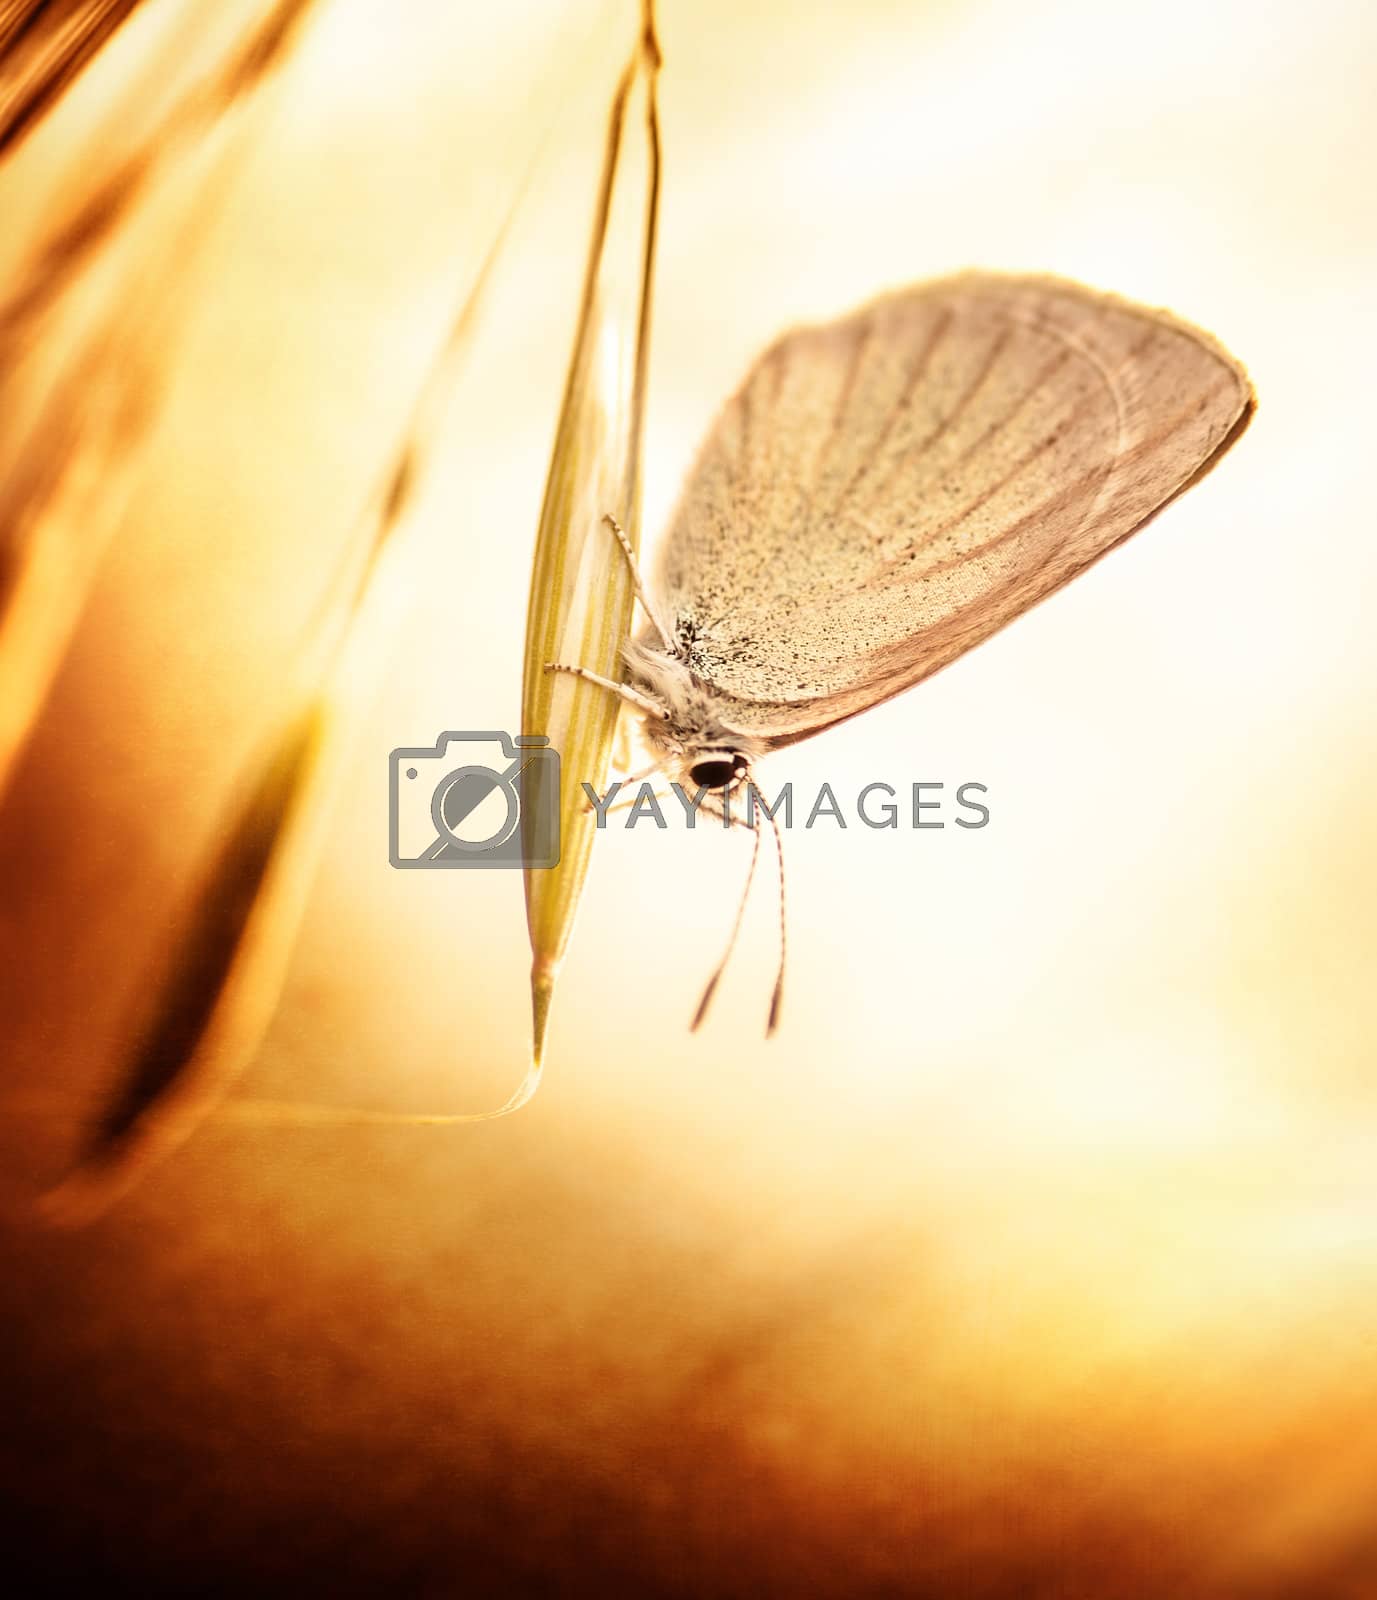 Royalty free image of Grunge photo of butterfly by Anna_Omelchenko